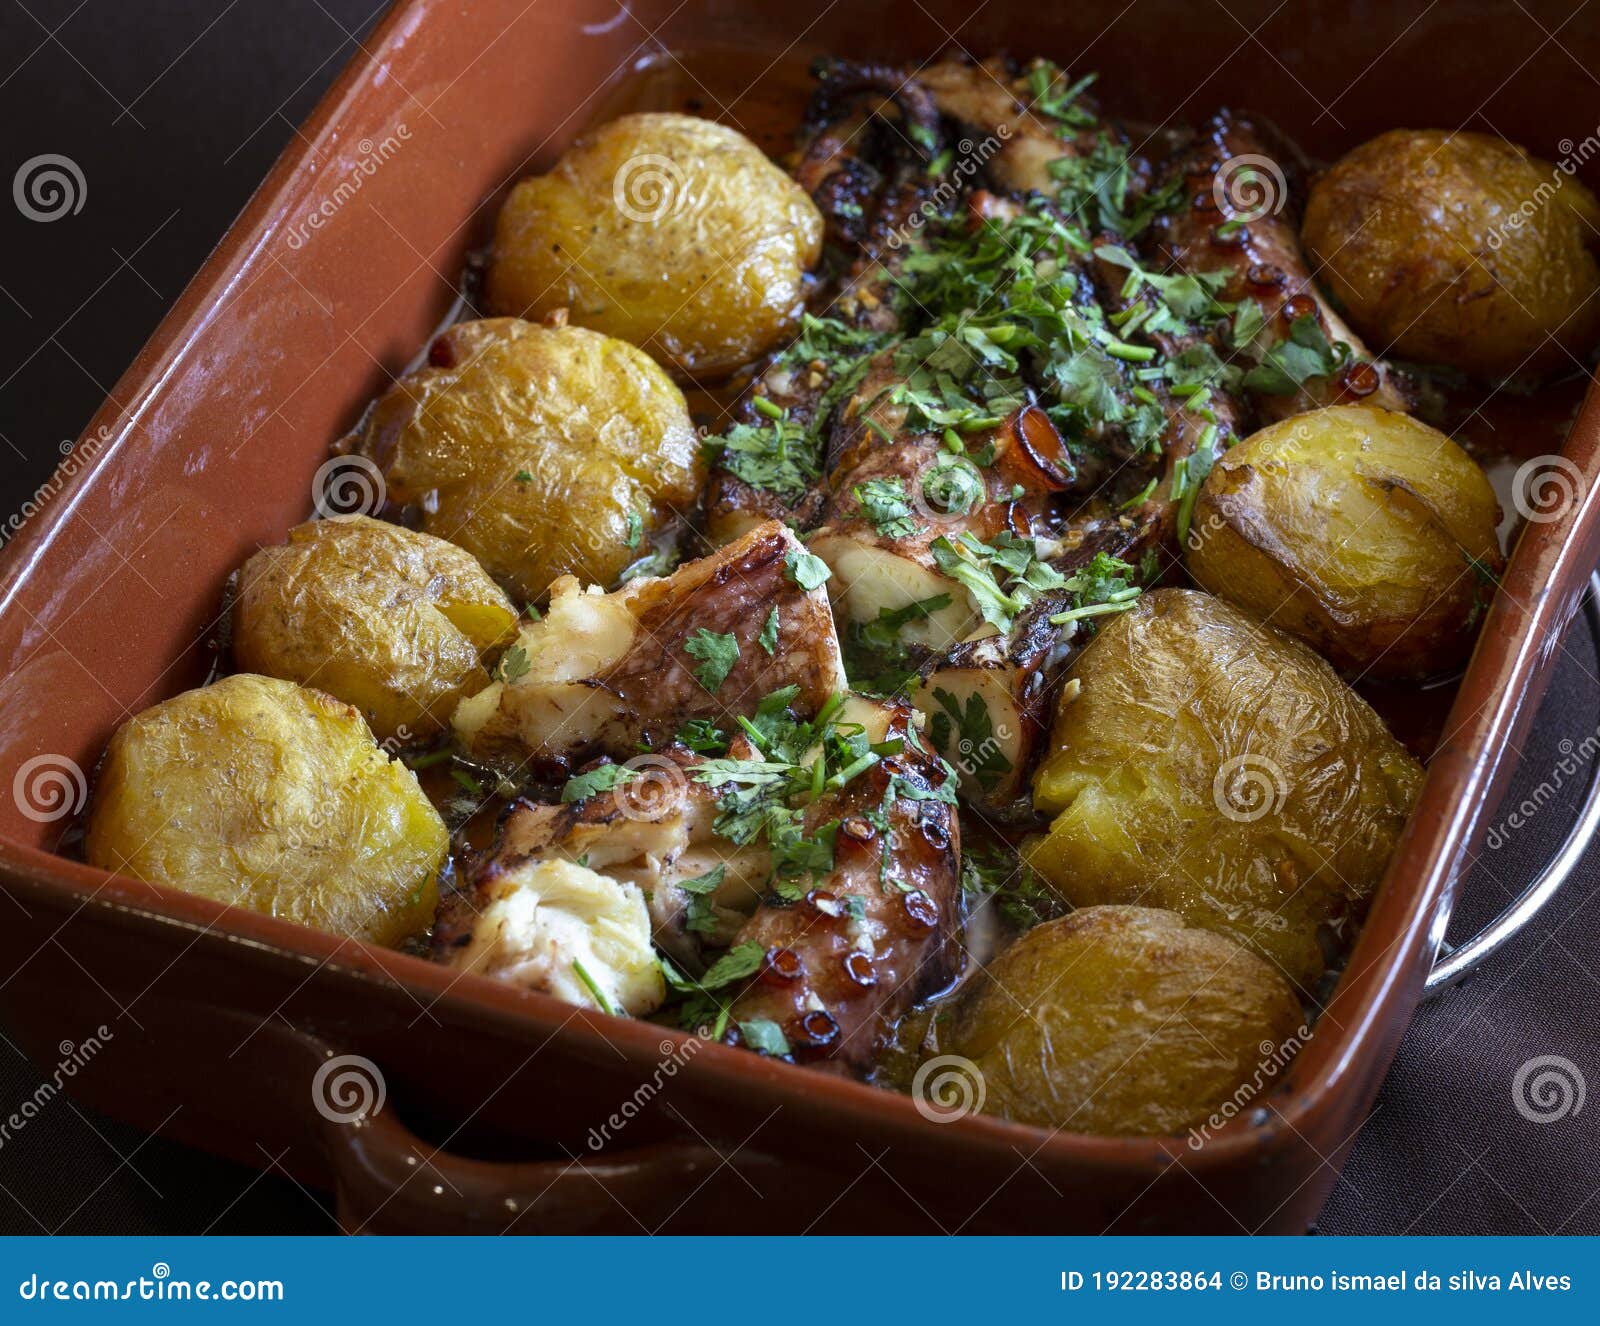 the `polvo a lagareiro` a famous and very popular portuguese dish.